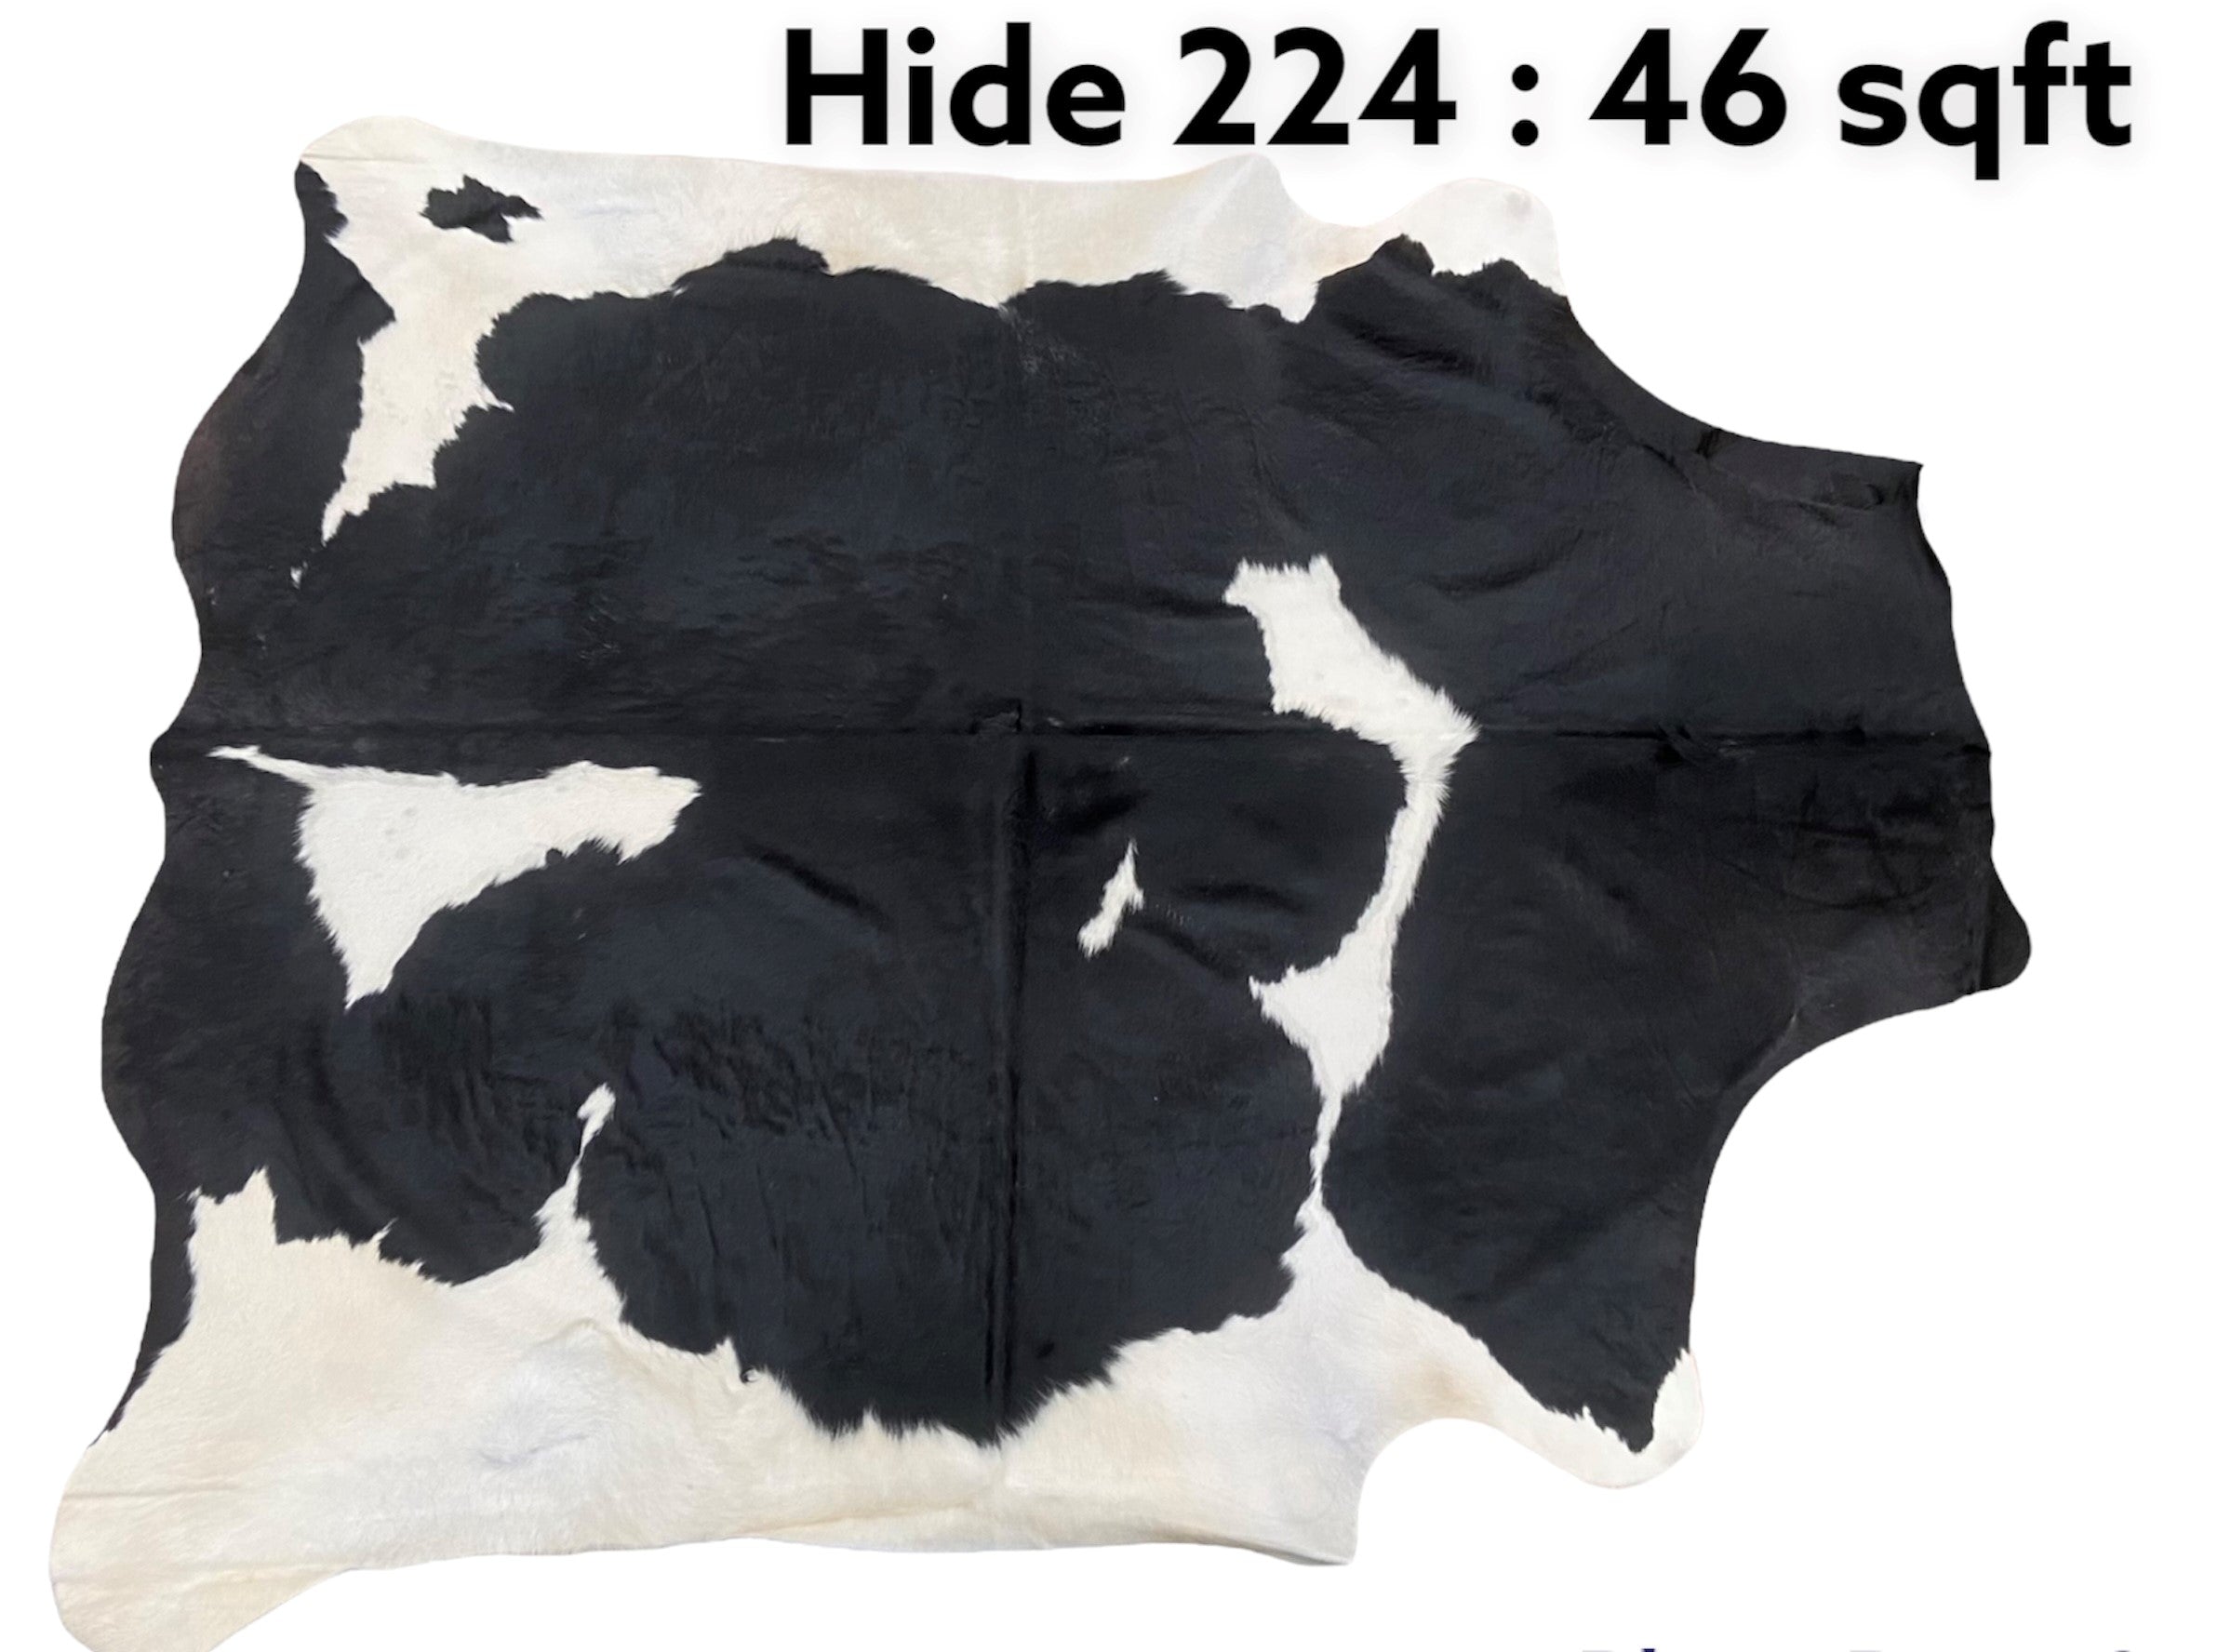 Natural Hair On Cow Hide : This Hide Is Perfect For Wall Hanging, Leather Rugs, Leather Upholstery & Leather Accessories. (Hide224)